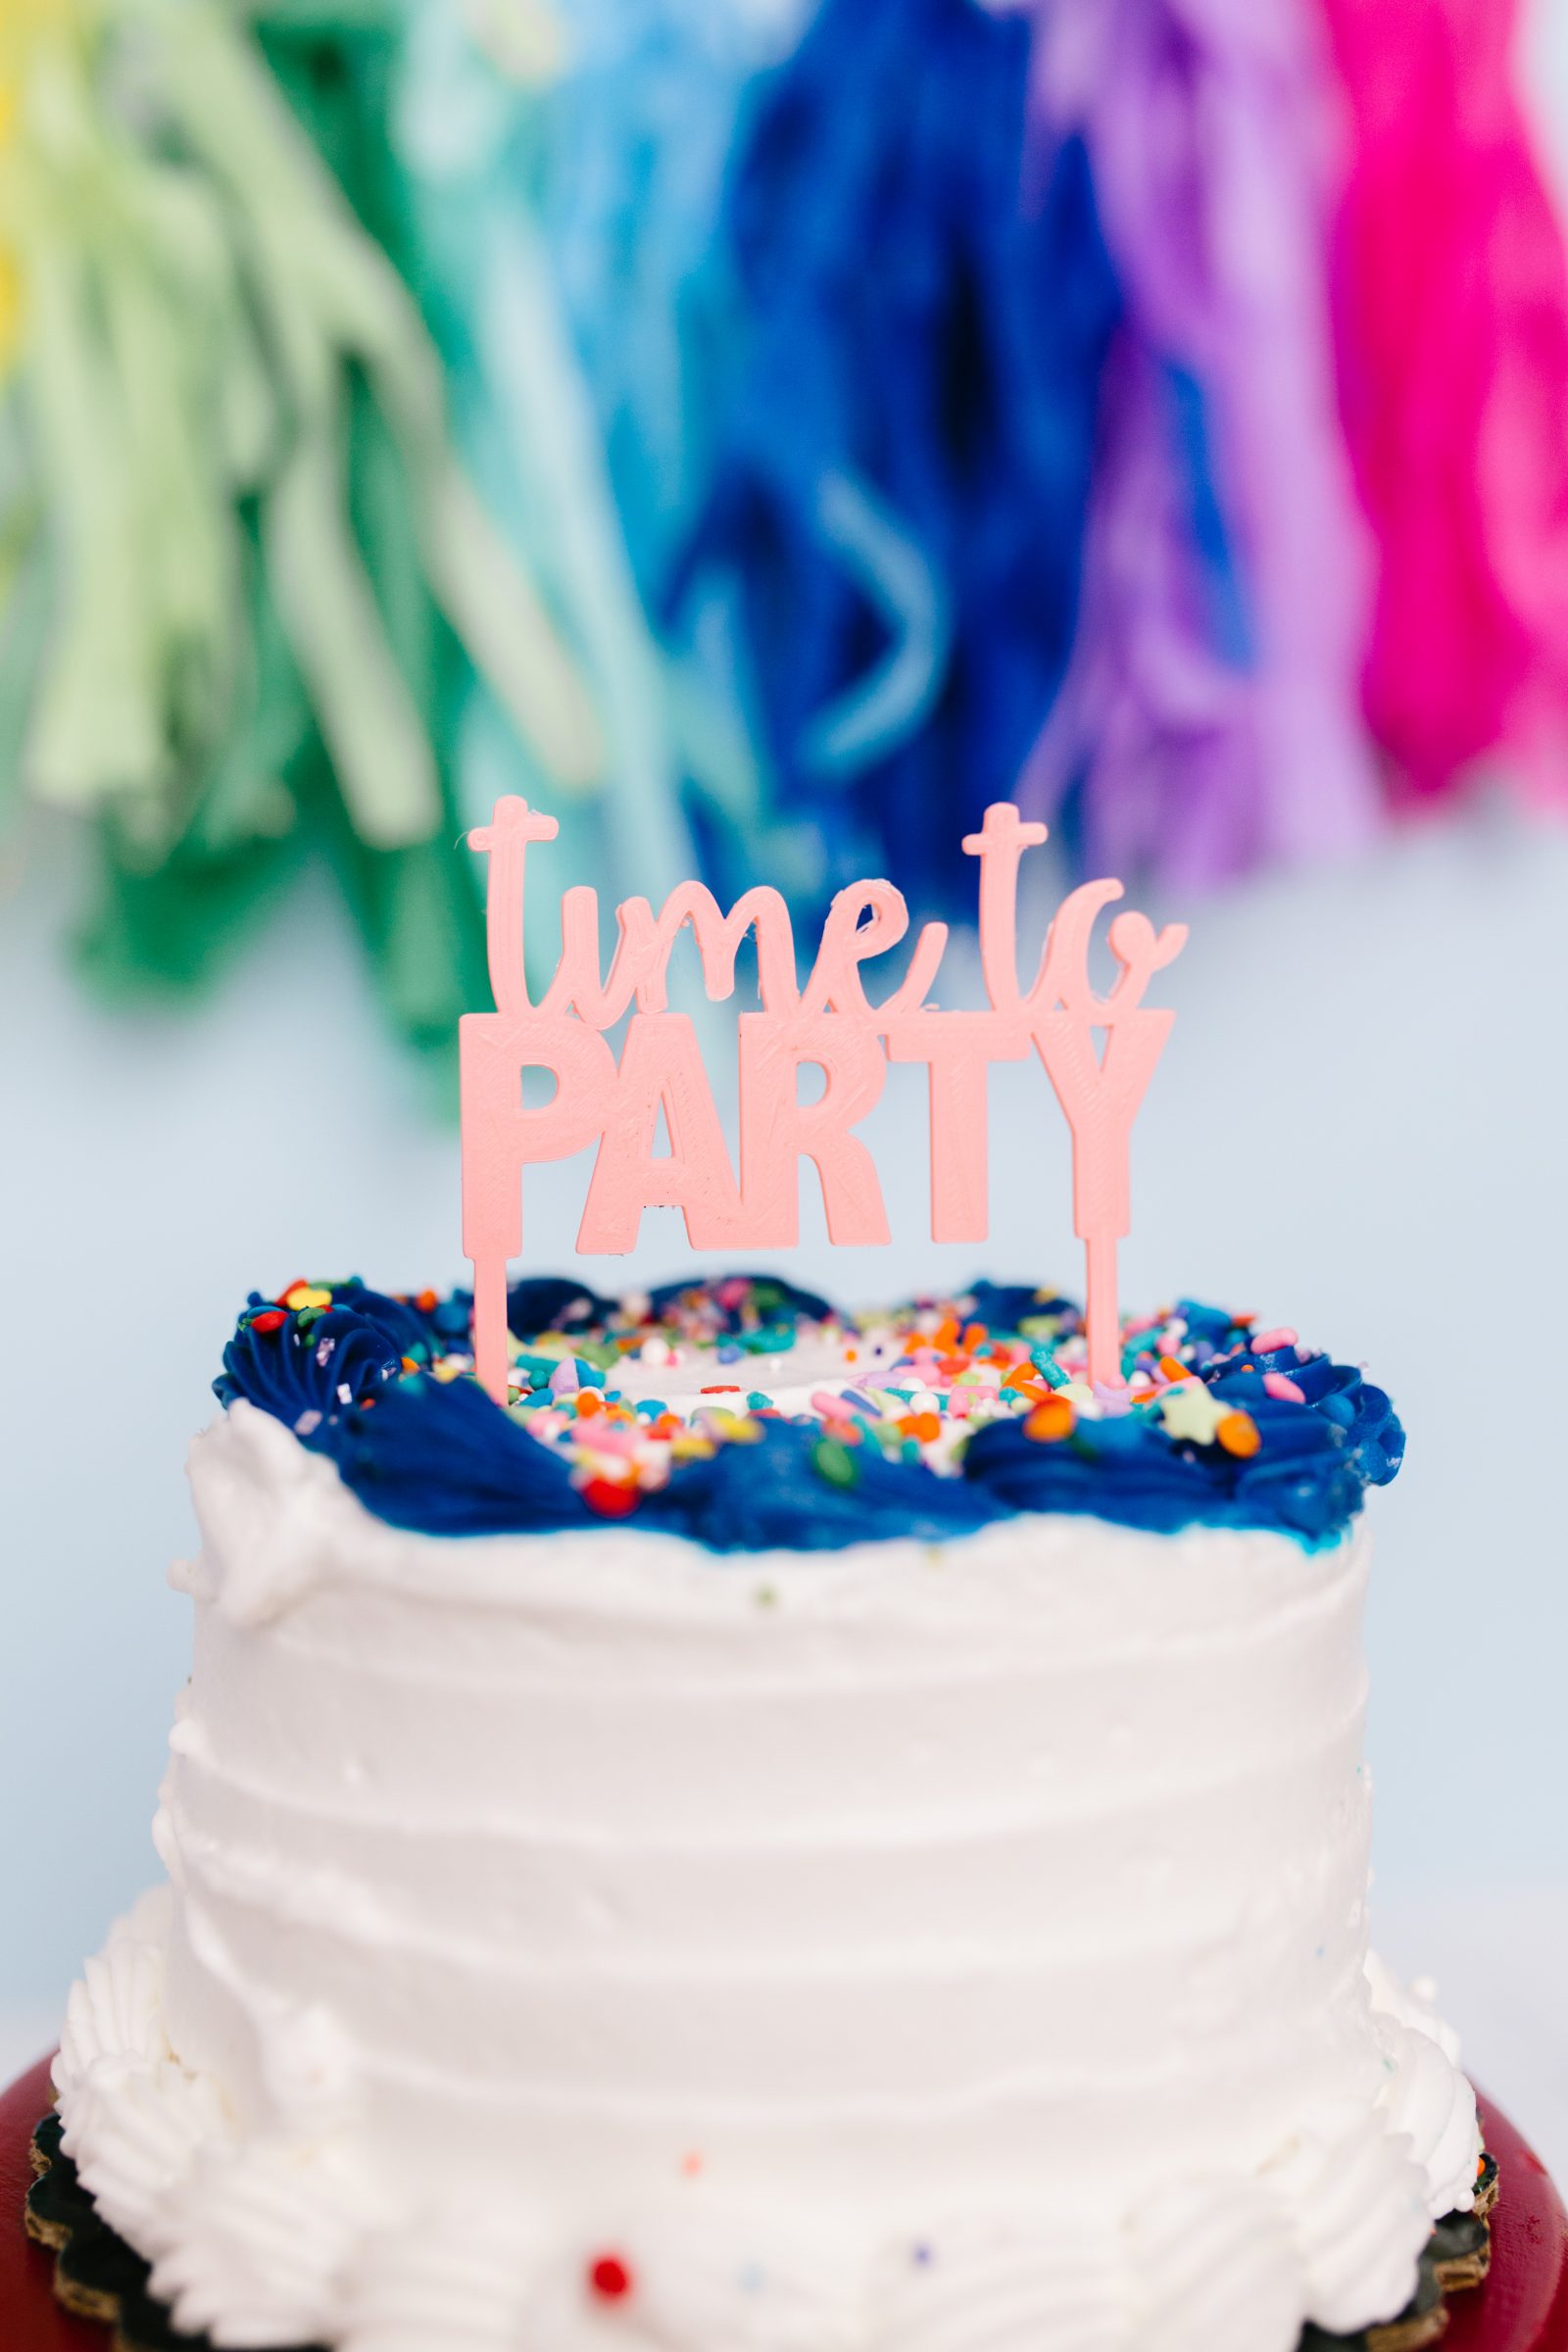 Cake Decorations: 3D Printed Cake Topper Tutorial | The Pretty ...